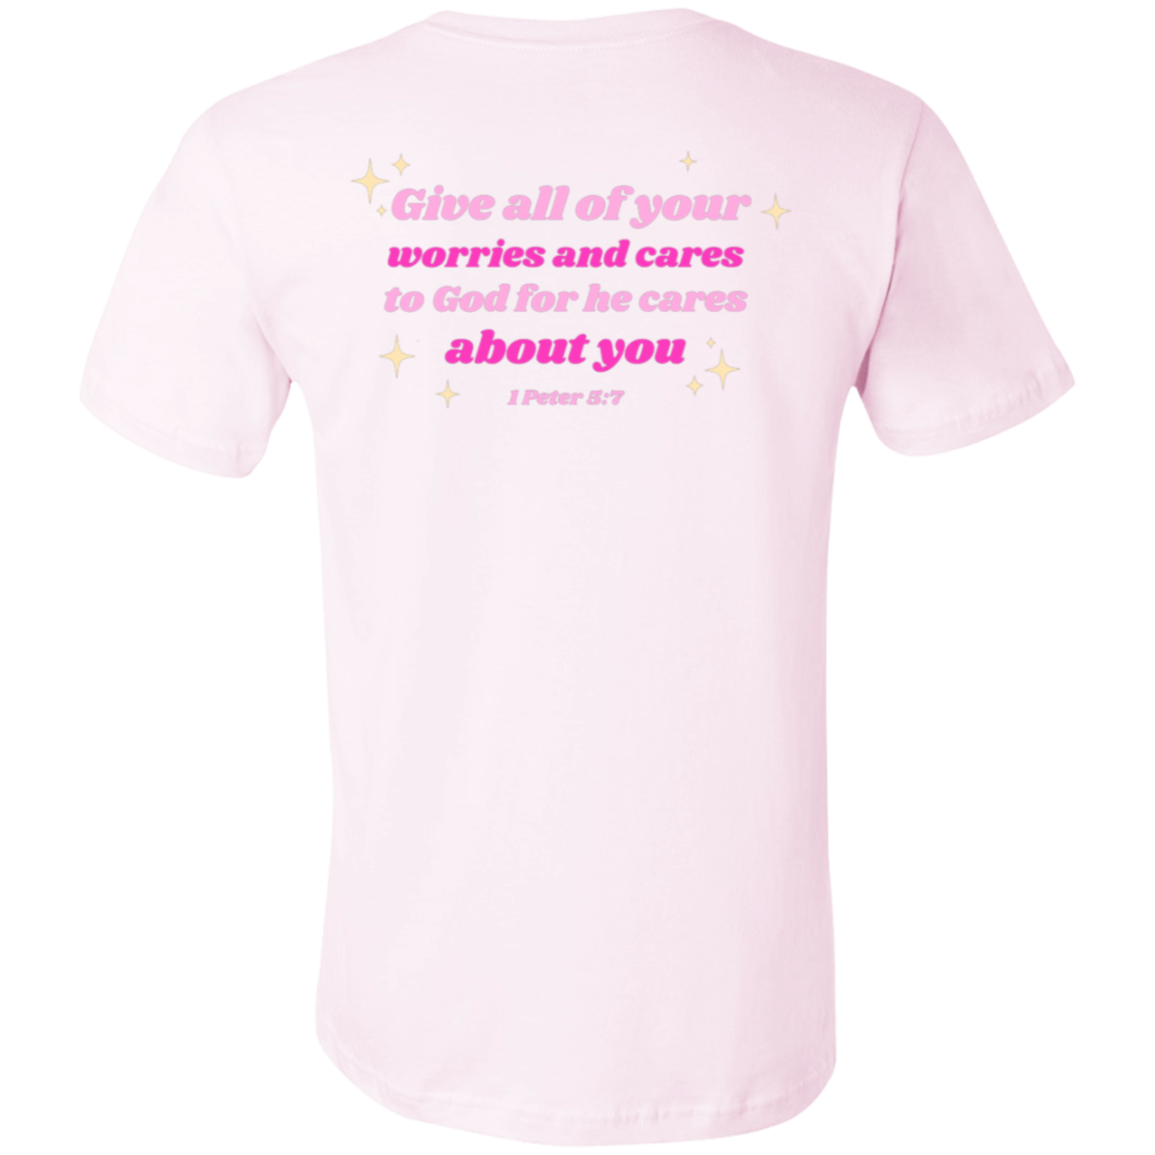 Give all your worries to God - T-shirt